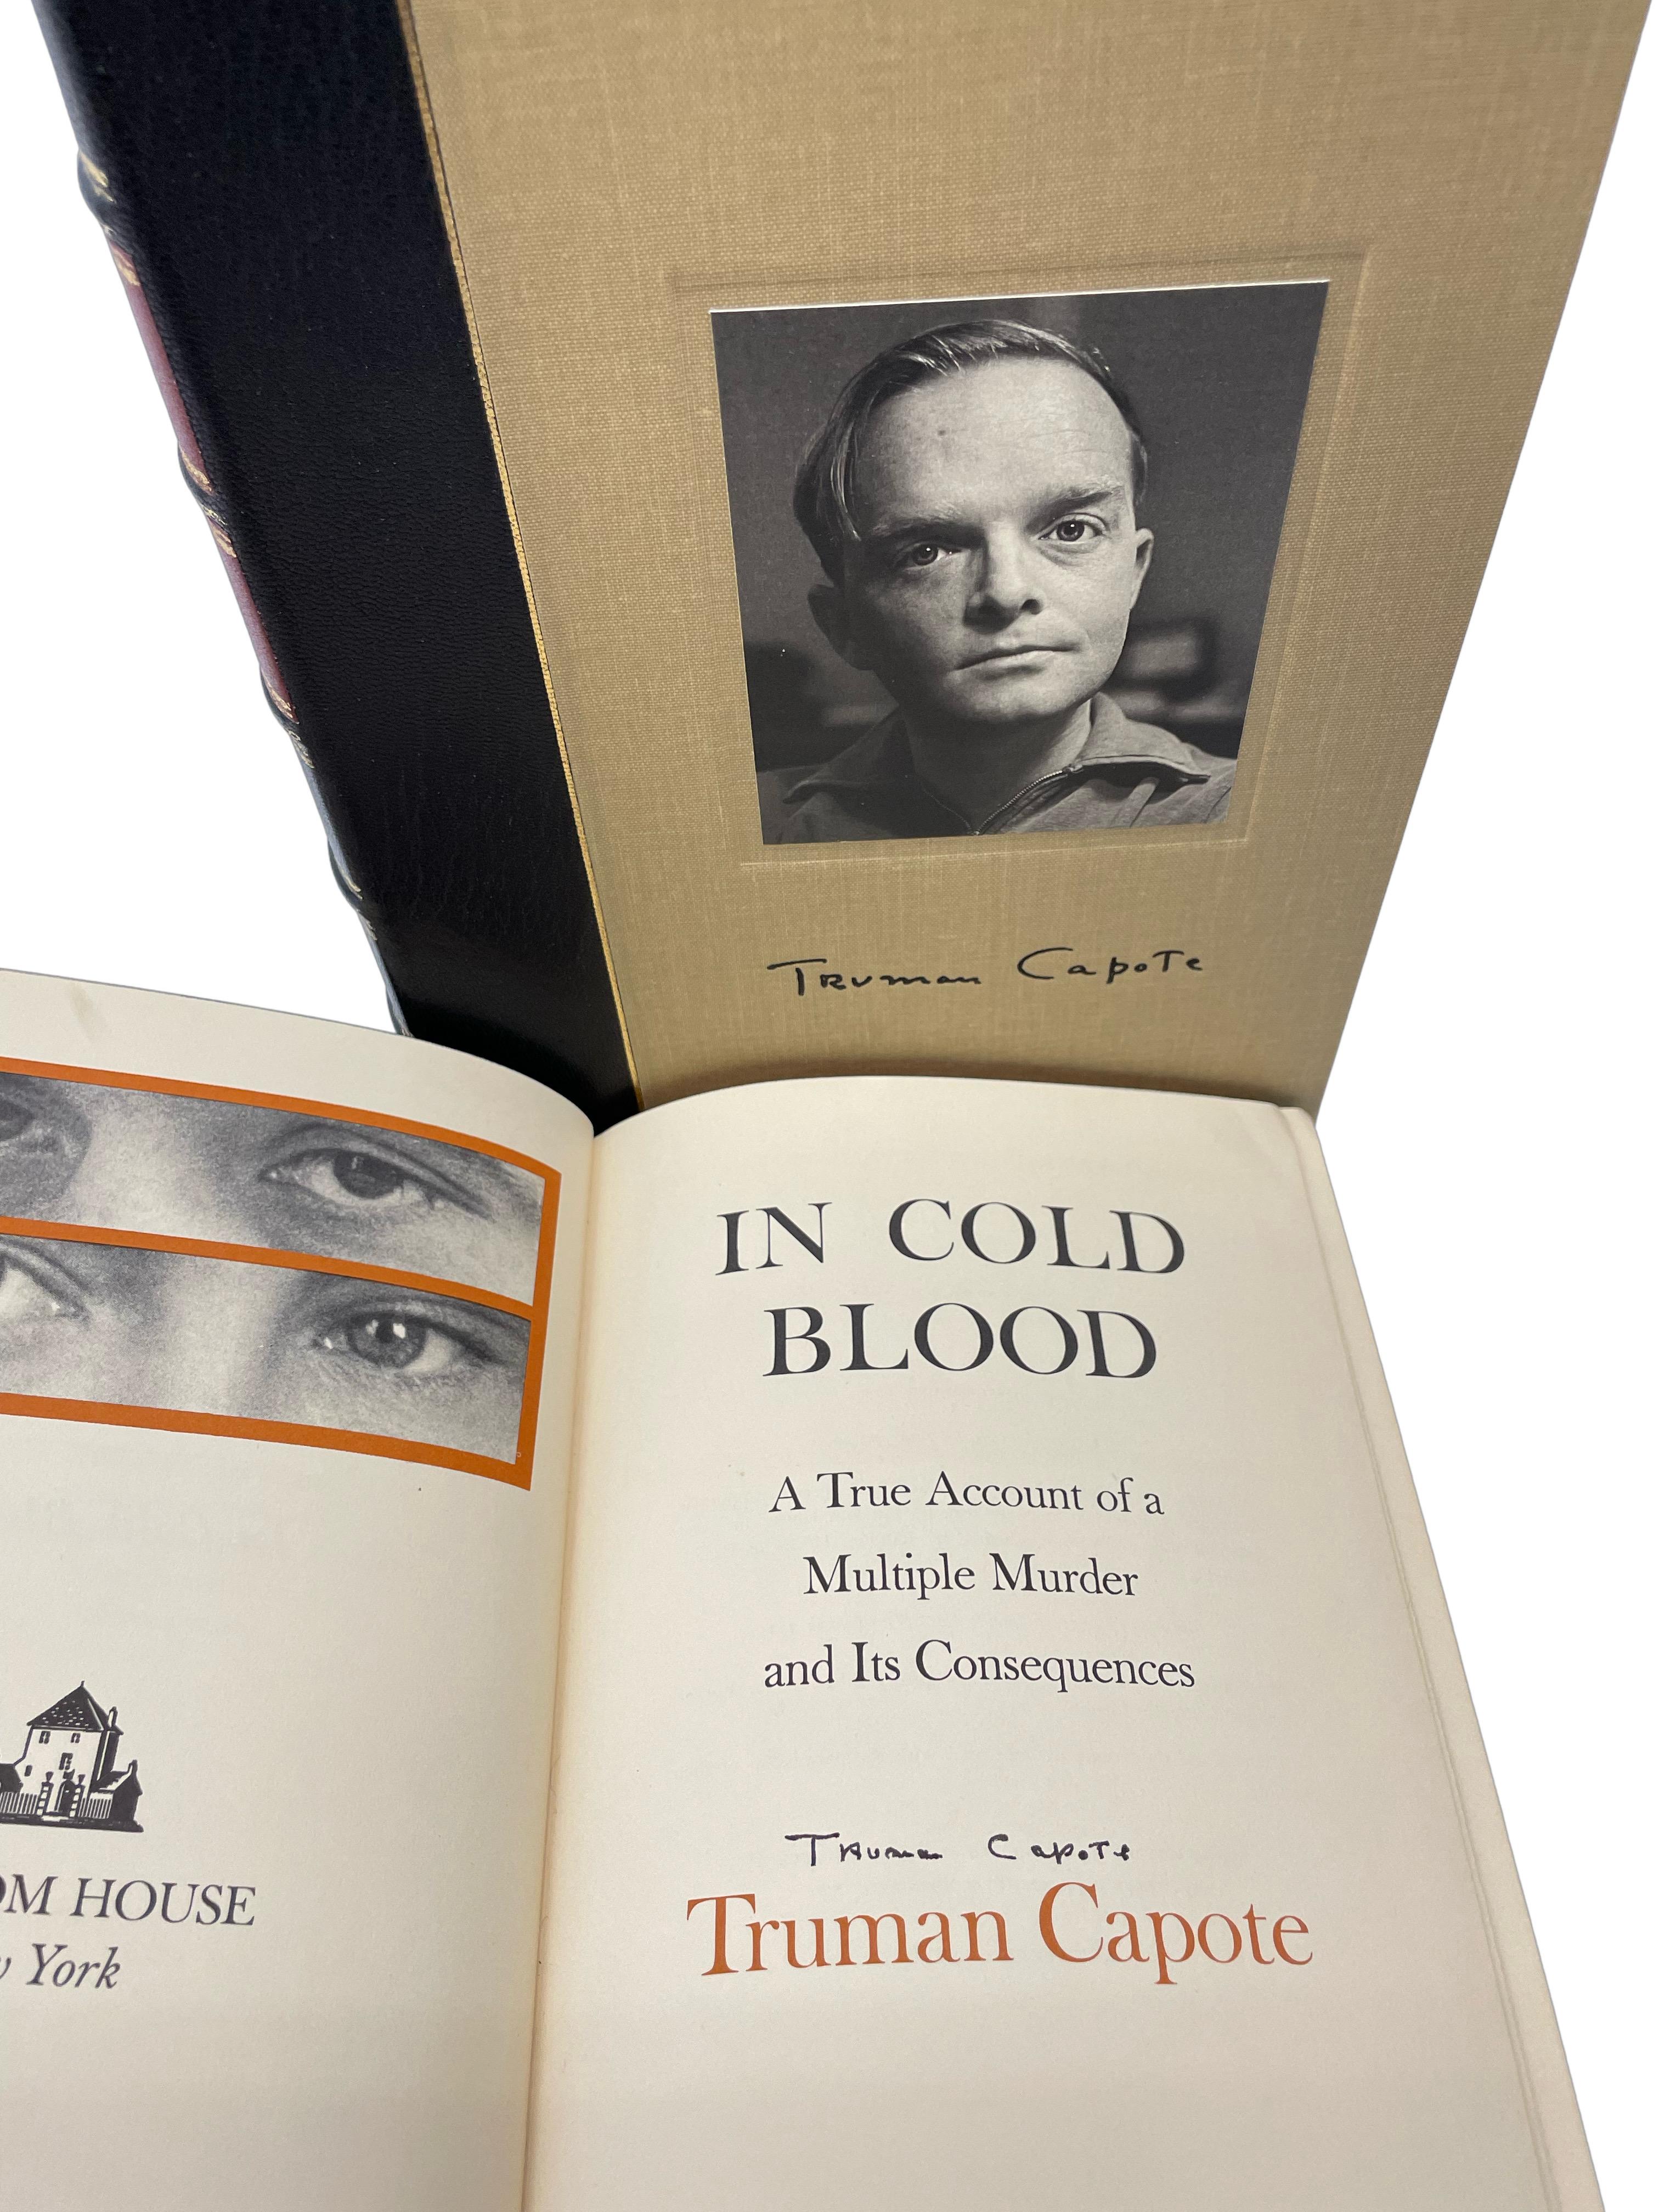 Capote, Truman. In Cold Blood. New York: Random House, Inc., 1965. Book club edition, first printing. Signed by Capote on title page. Octavo. In publisher’s maroon cloth board with original clipped dust jacket. Presented with a new archival ¼